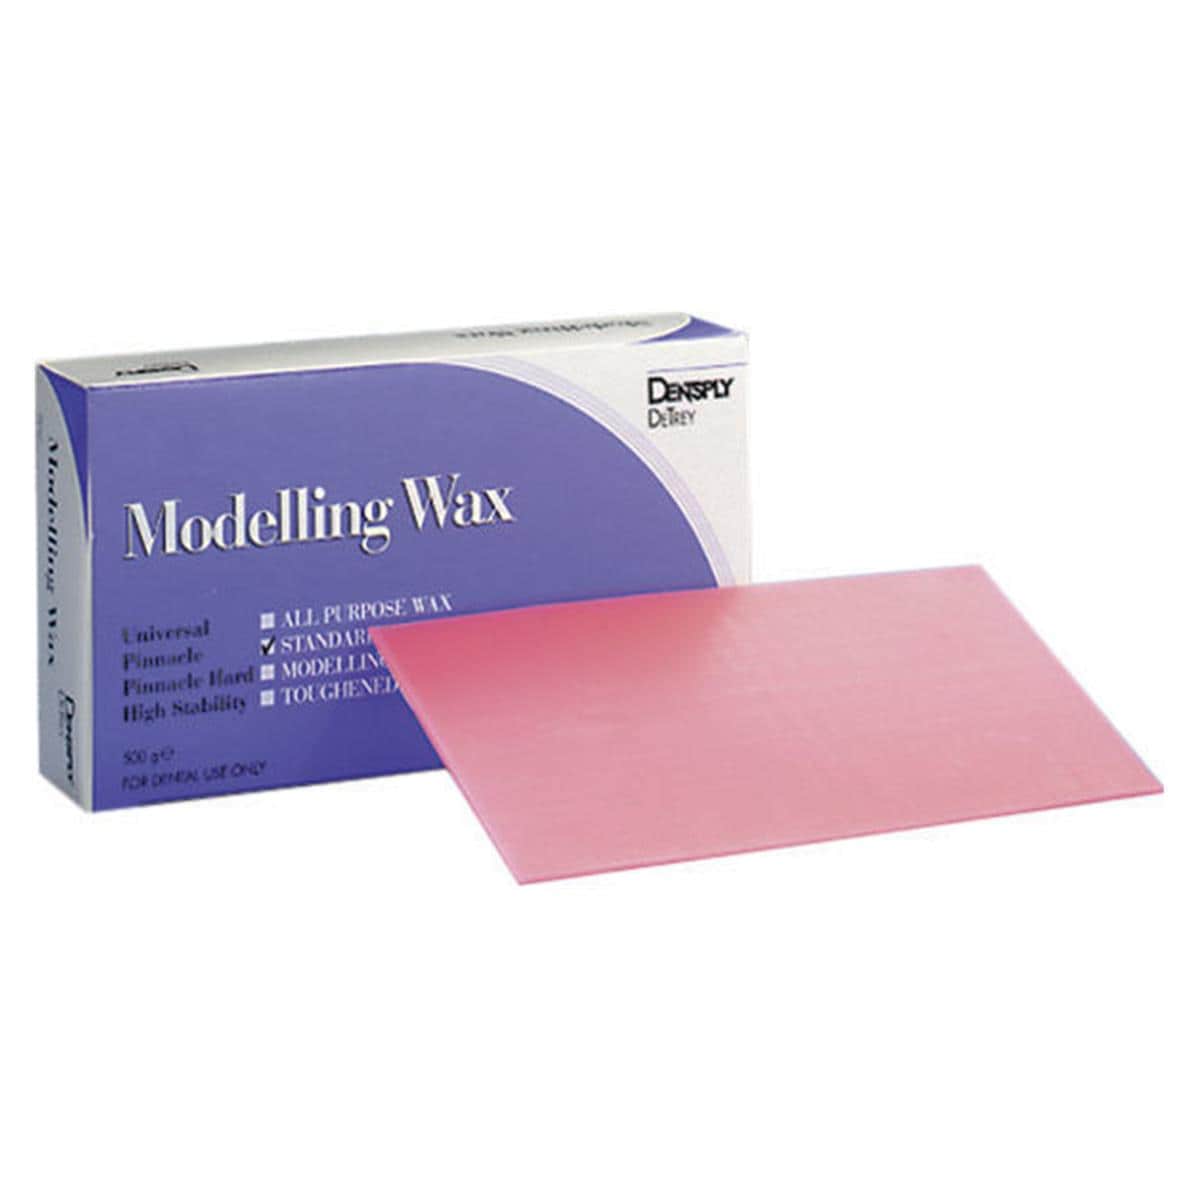 Modelling Wax - Universal, Packung 500 g